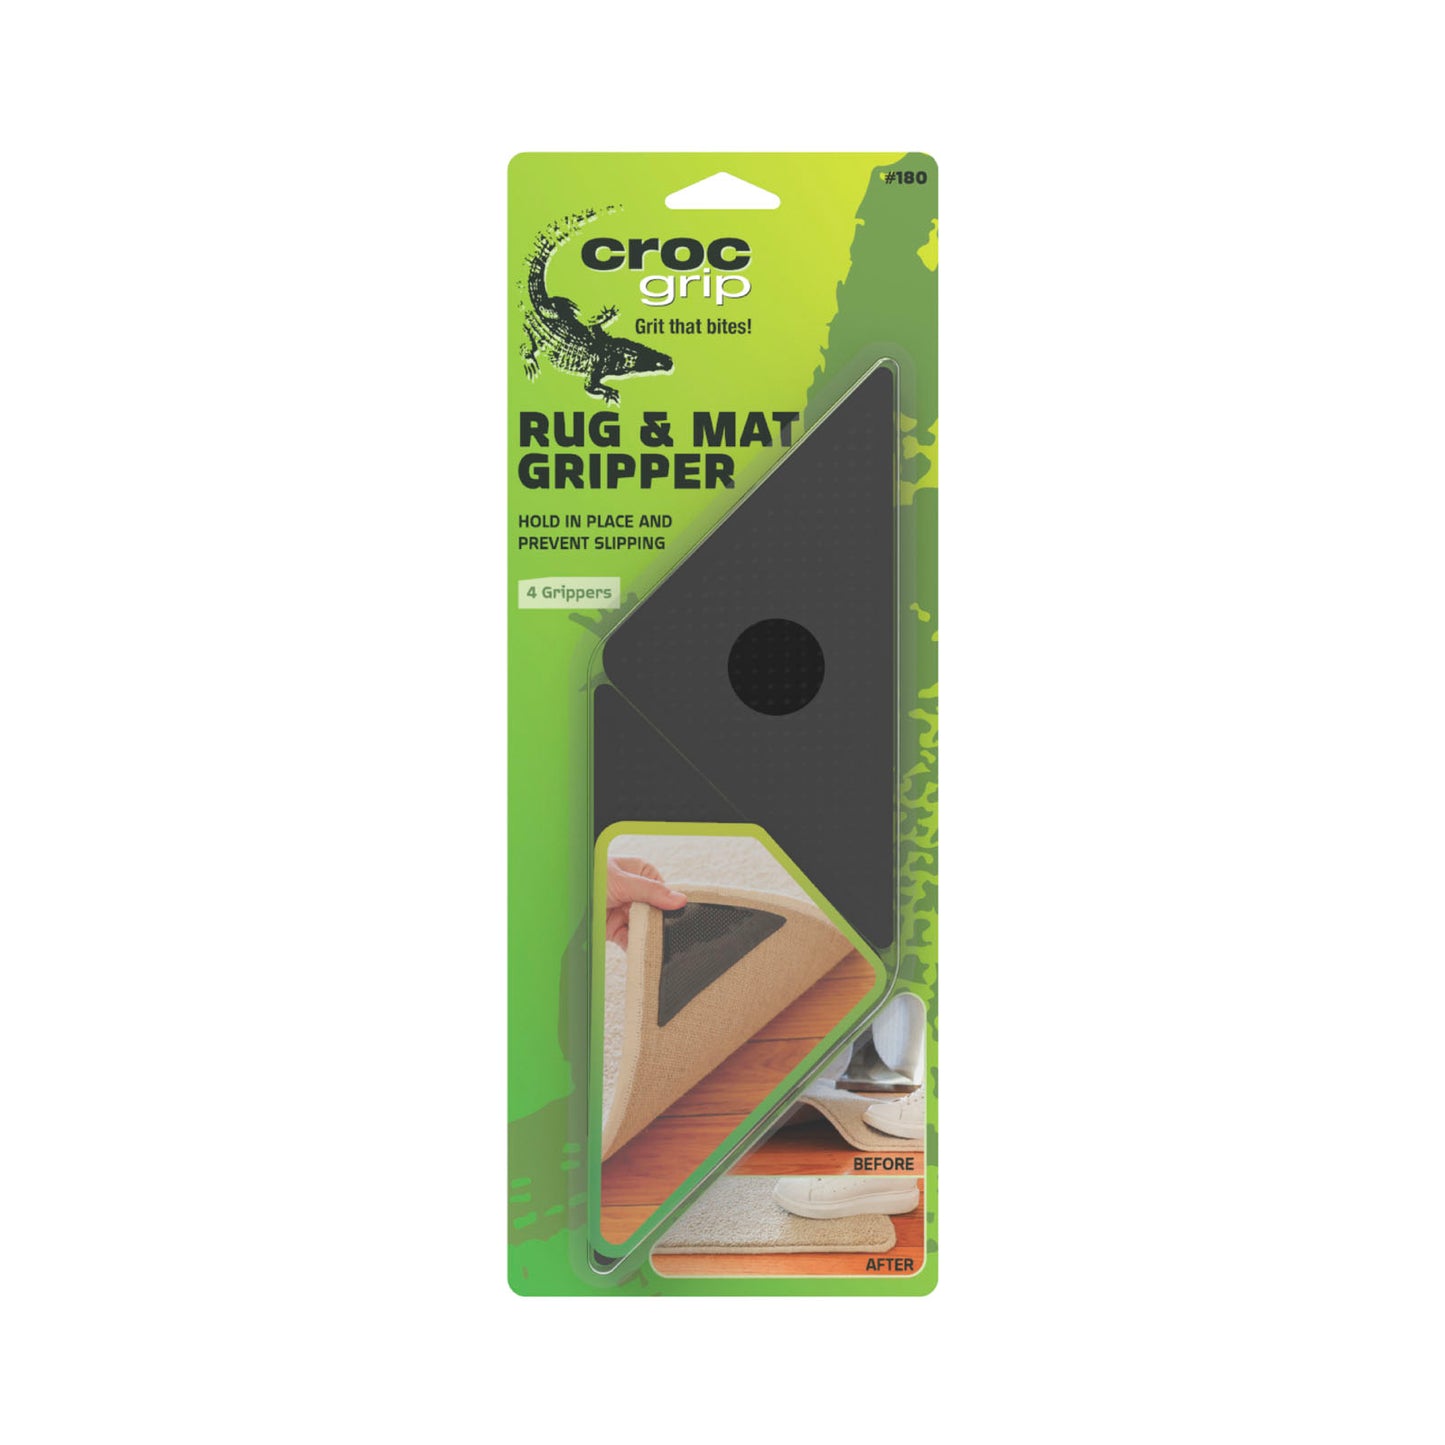 Reusable Adhesive Rug Grippers - 4 Pack